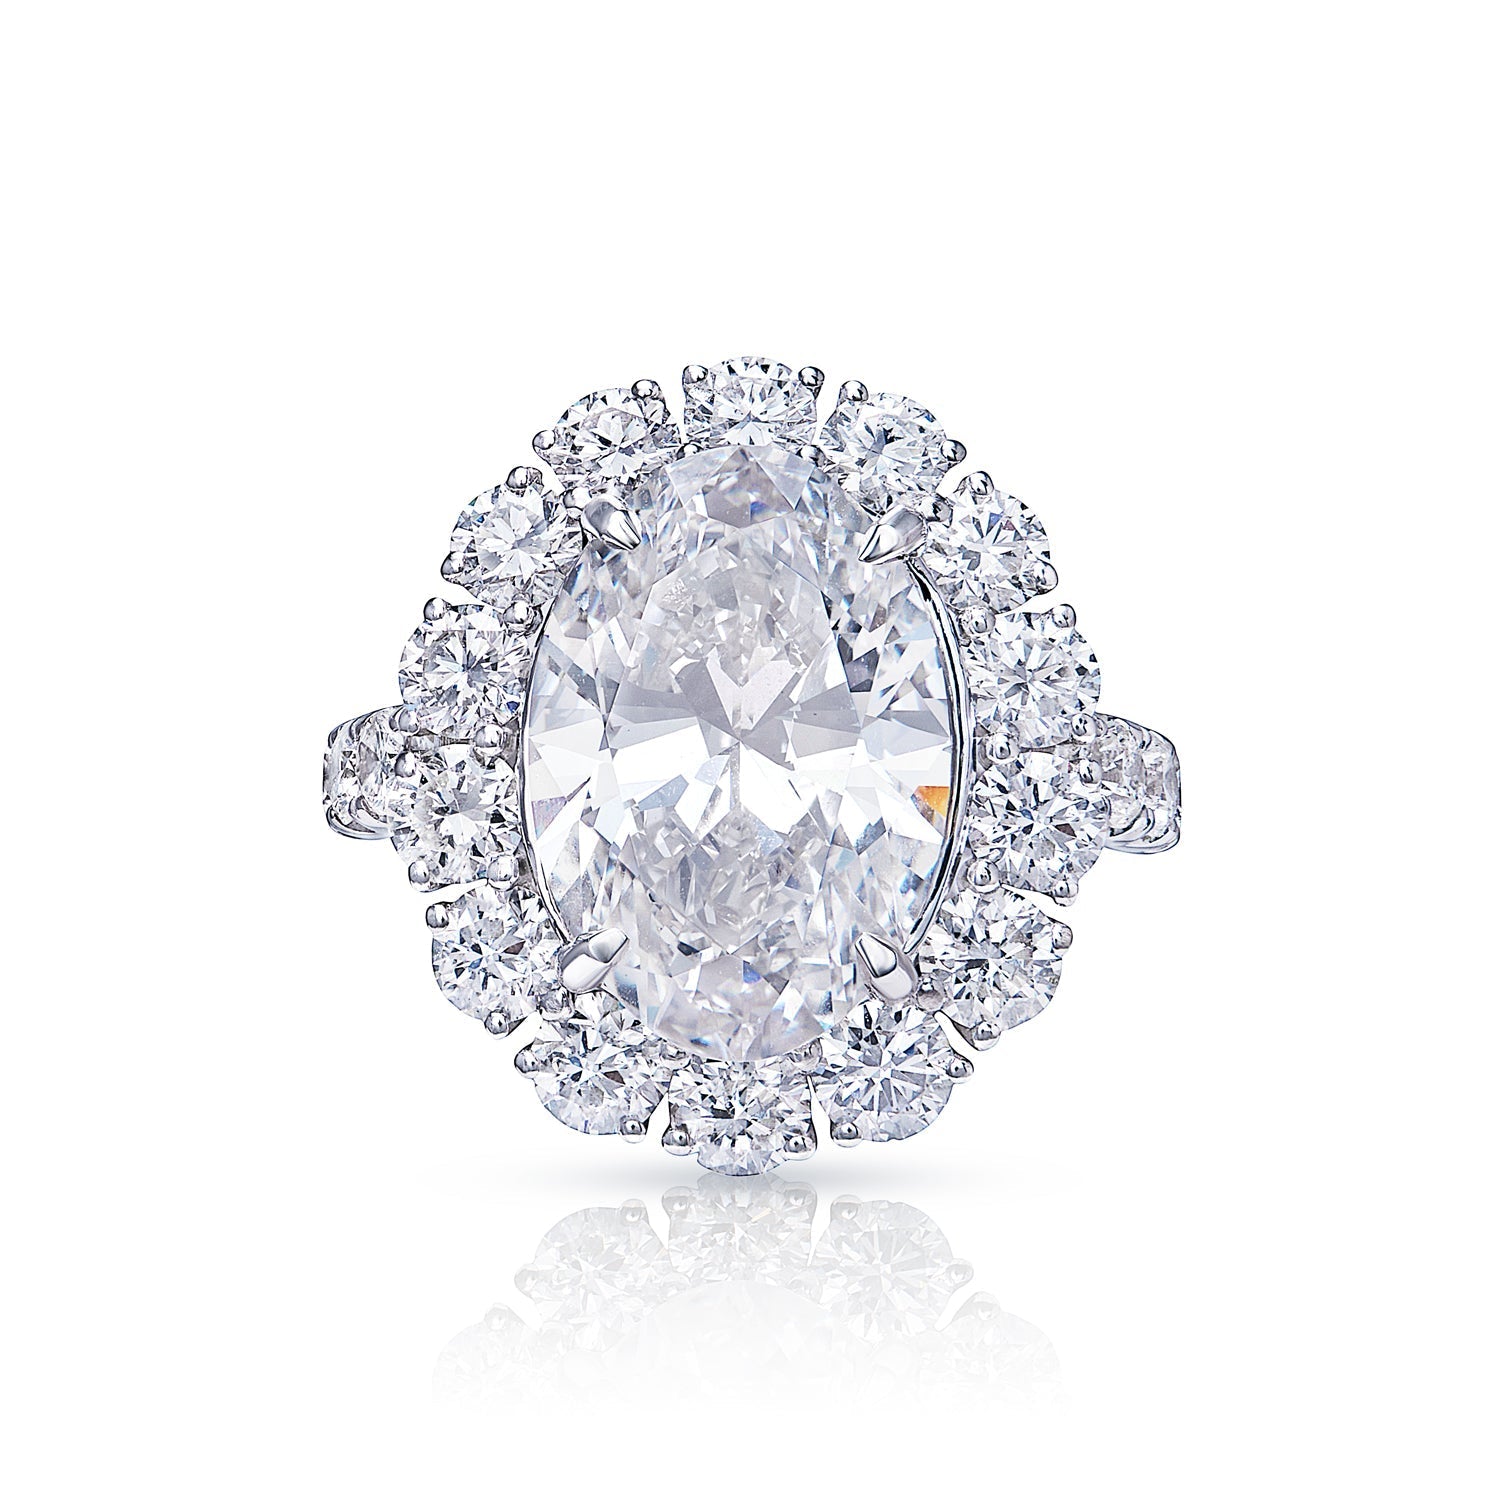 Carolina 9 Carat Round Brilliant Diamond Engagement Ring in White Gold. Front View